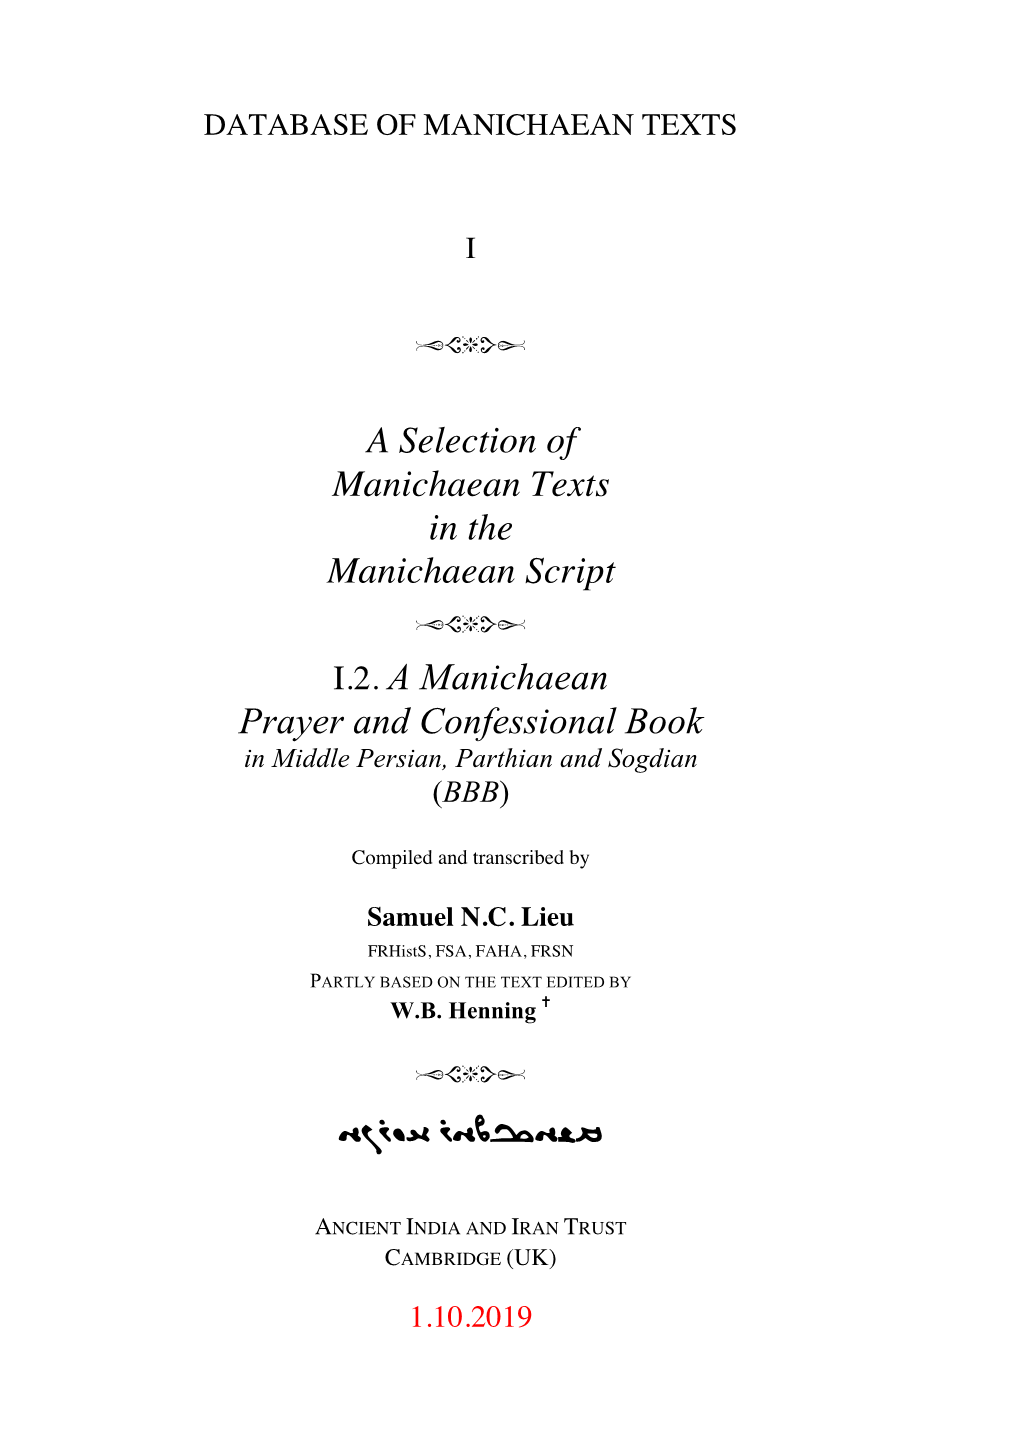 A Selection of Manichaean Texts in the Manichaean Script